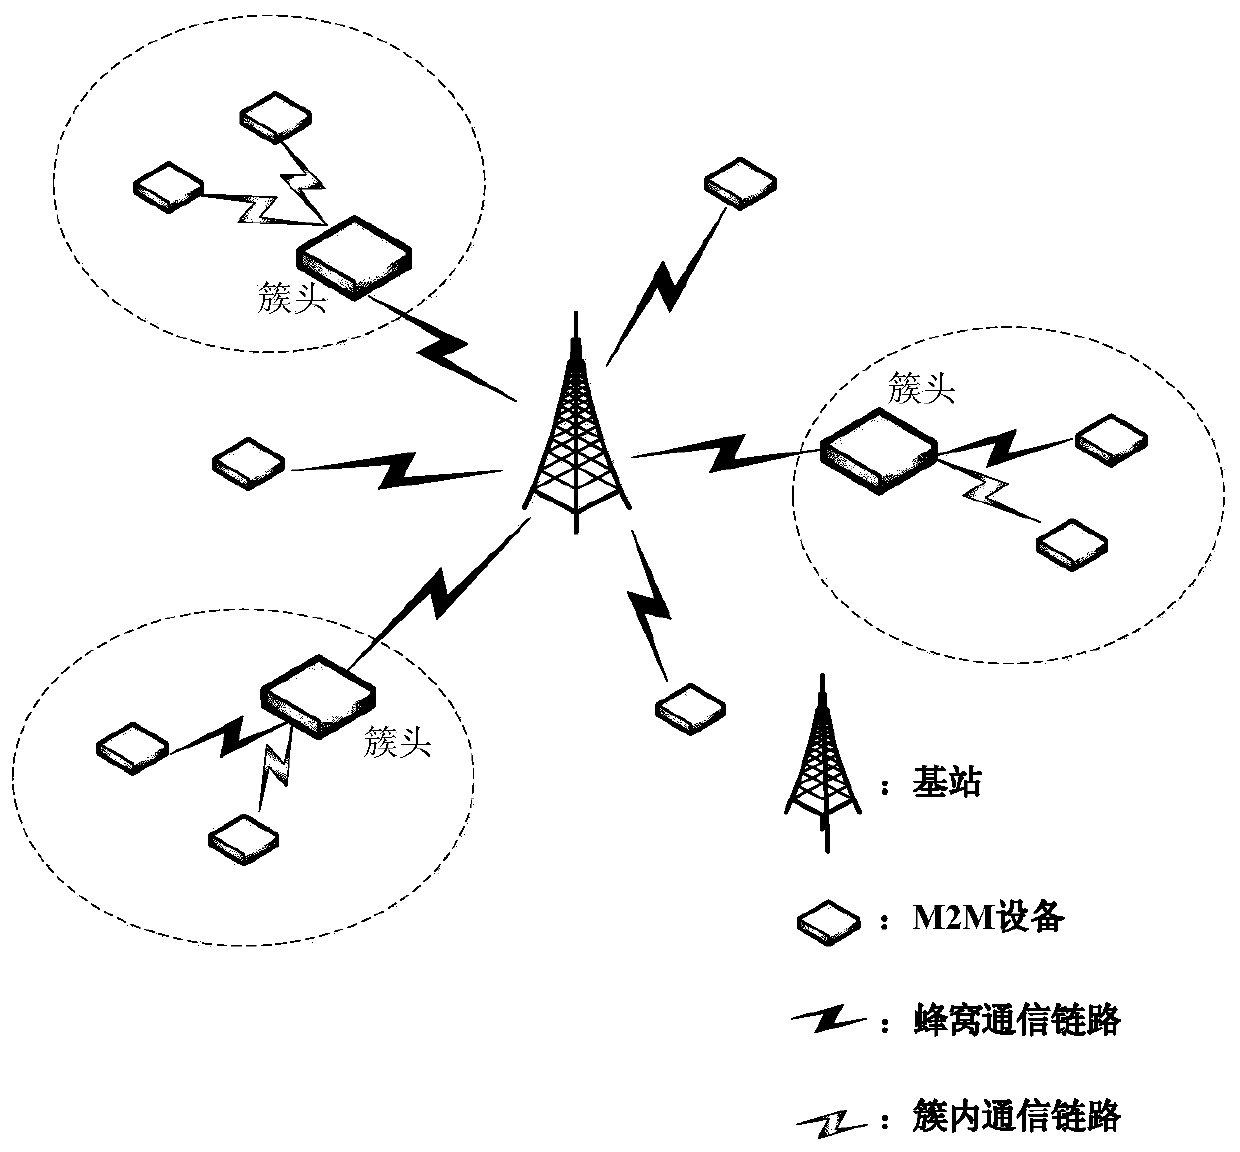 M2M communication network combined clustering and power distribution method based on non-orthogonal multiple access technology